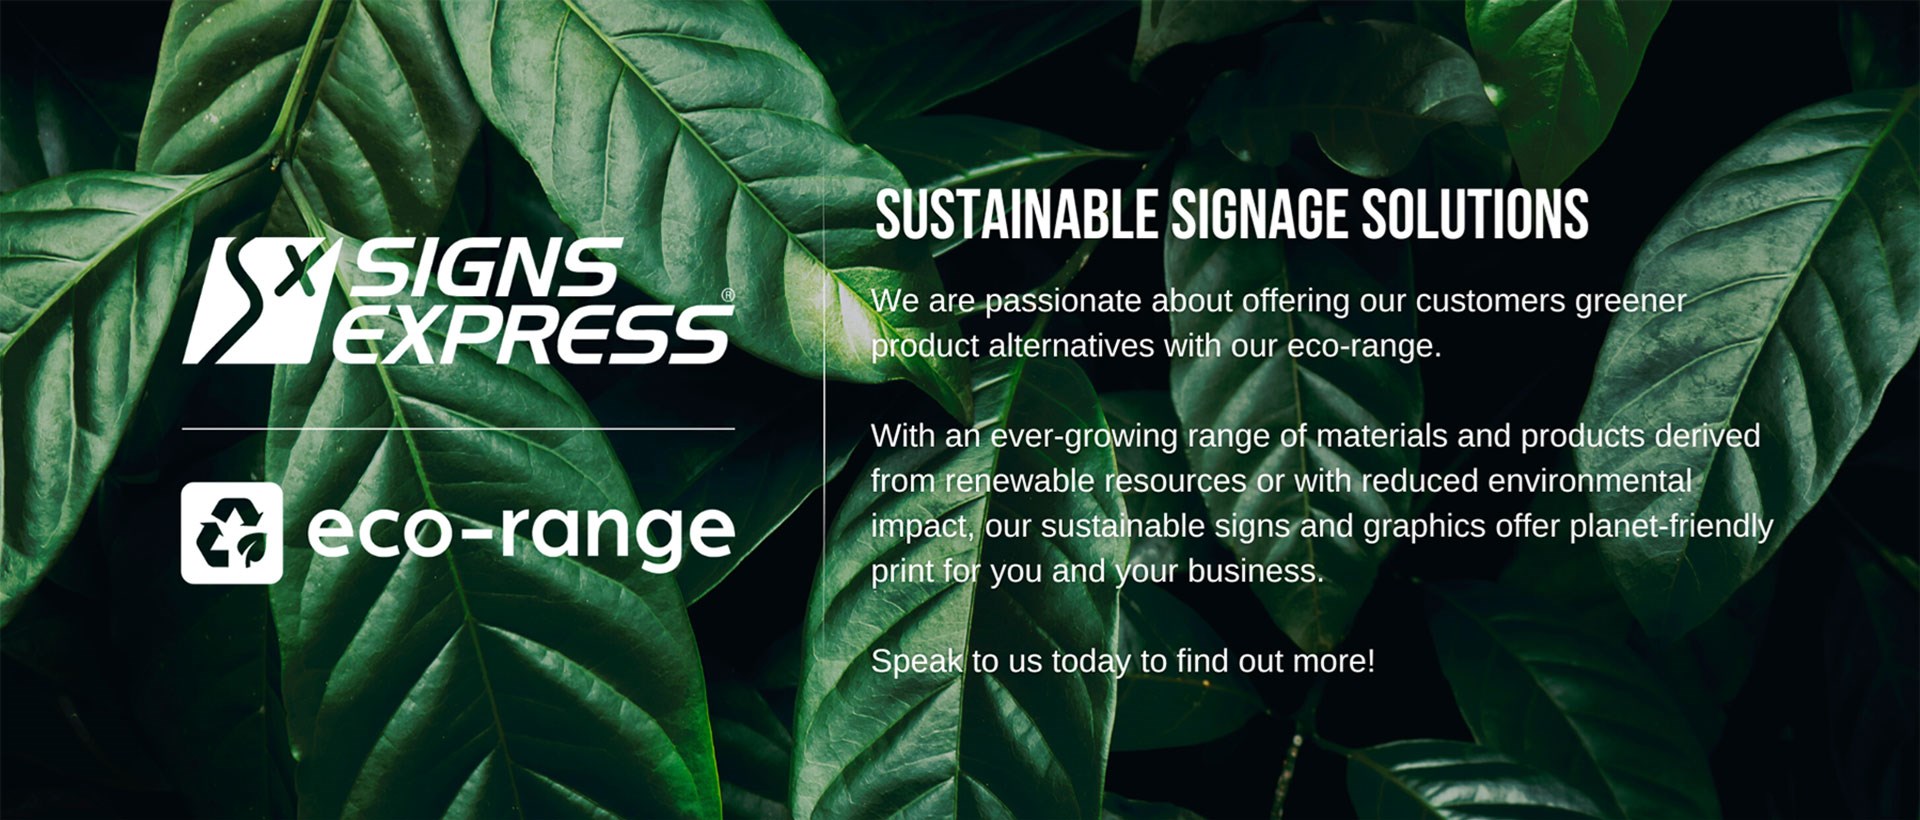 Website Sustainable Signage Solutions New